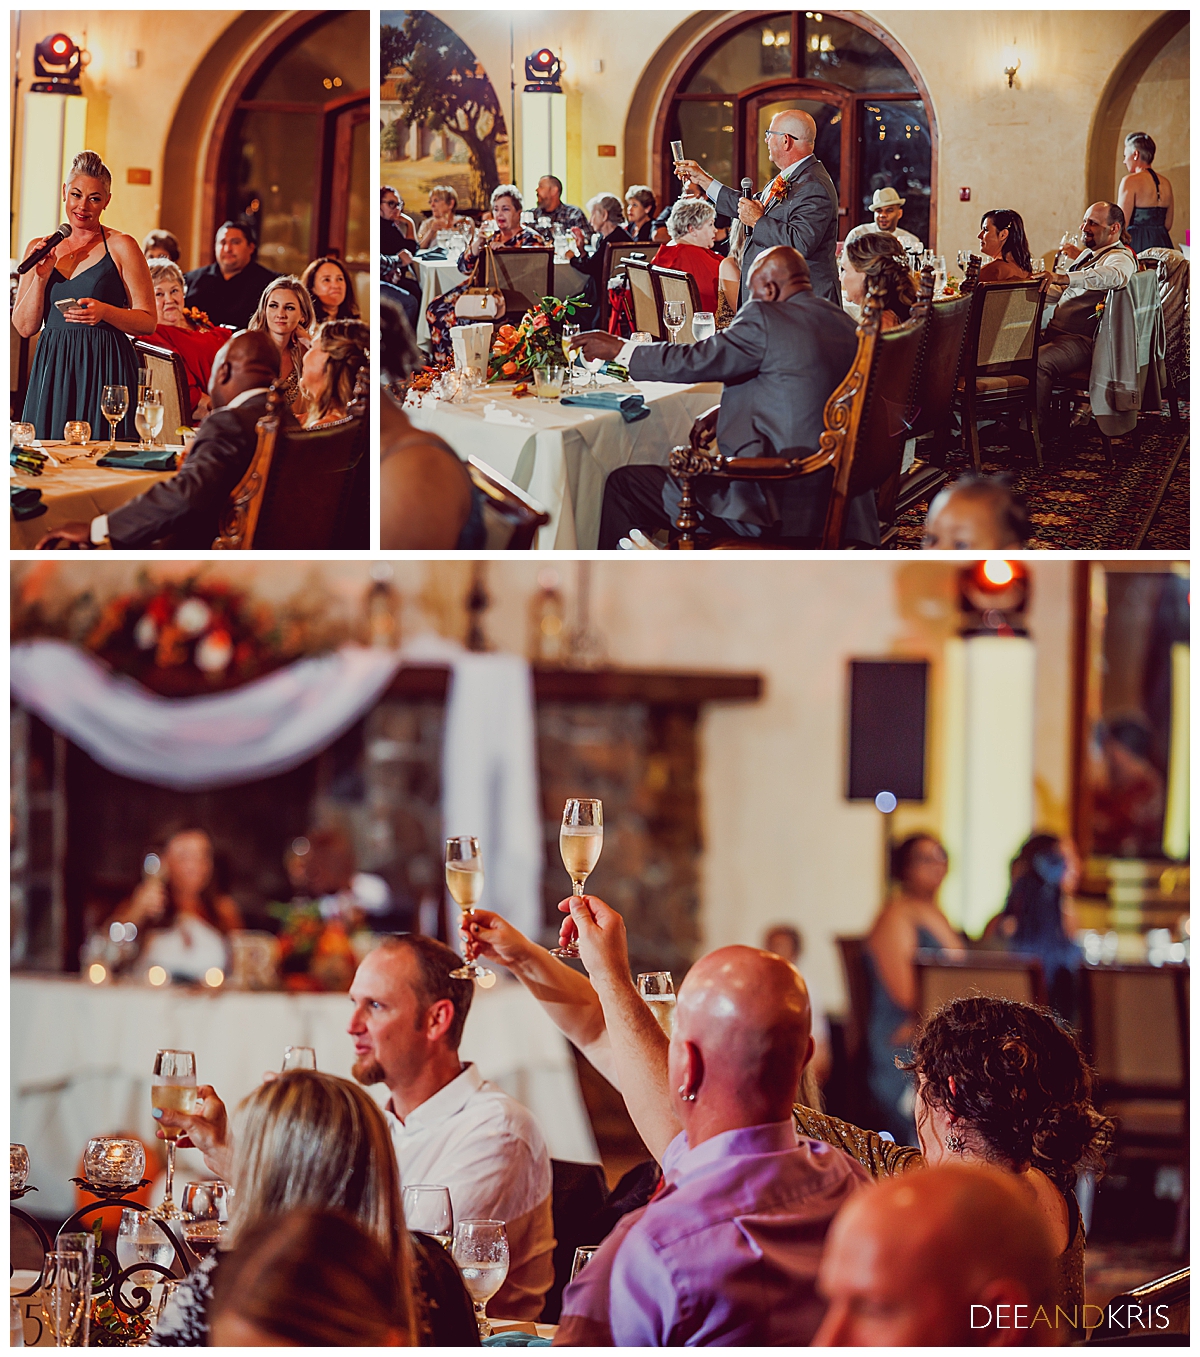 Three images: top left image of maid of honor toasting couple. top right image of bride's father toasting couple. Bottom image of guests glasses raised in the air.